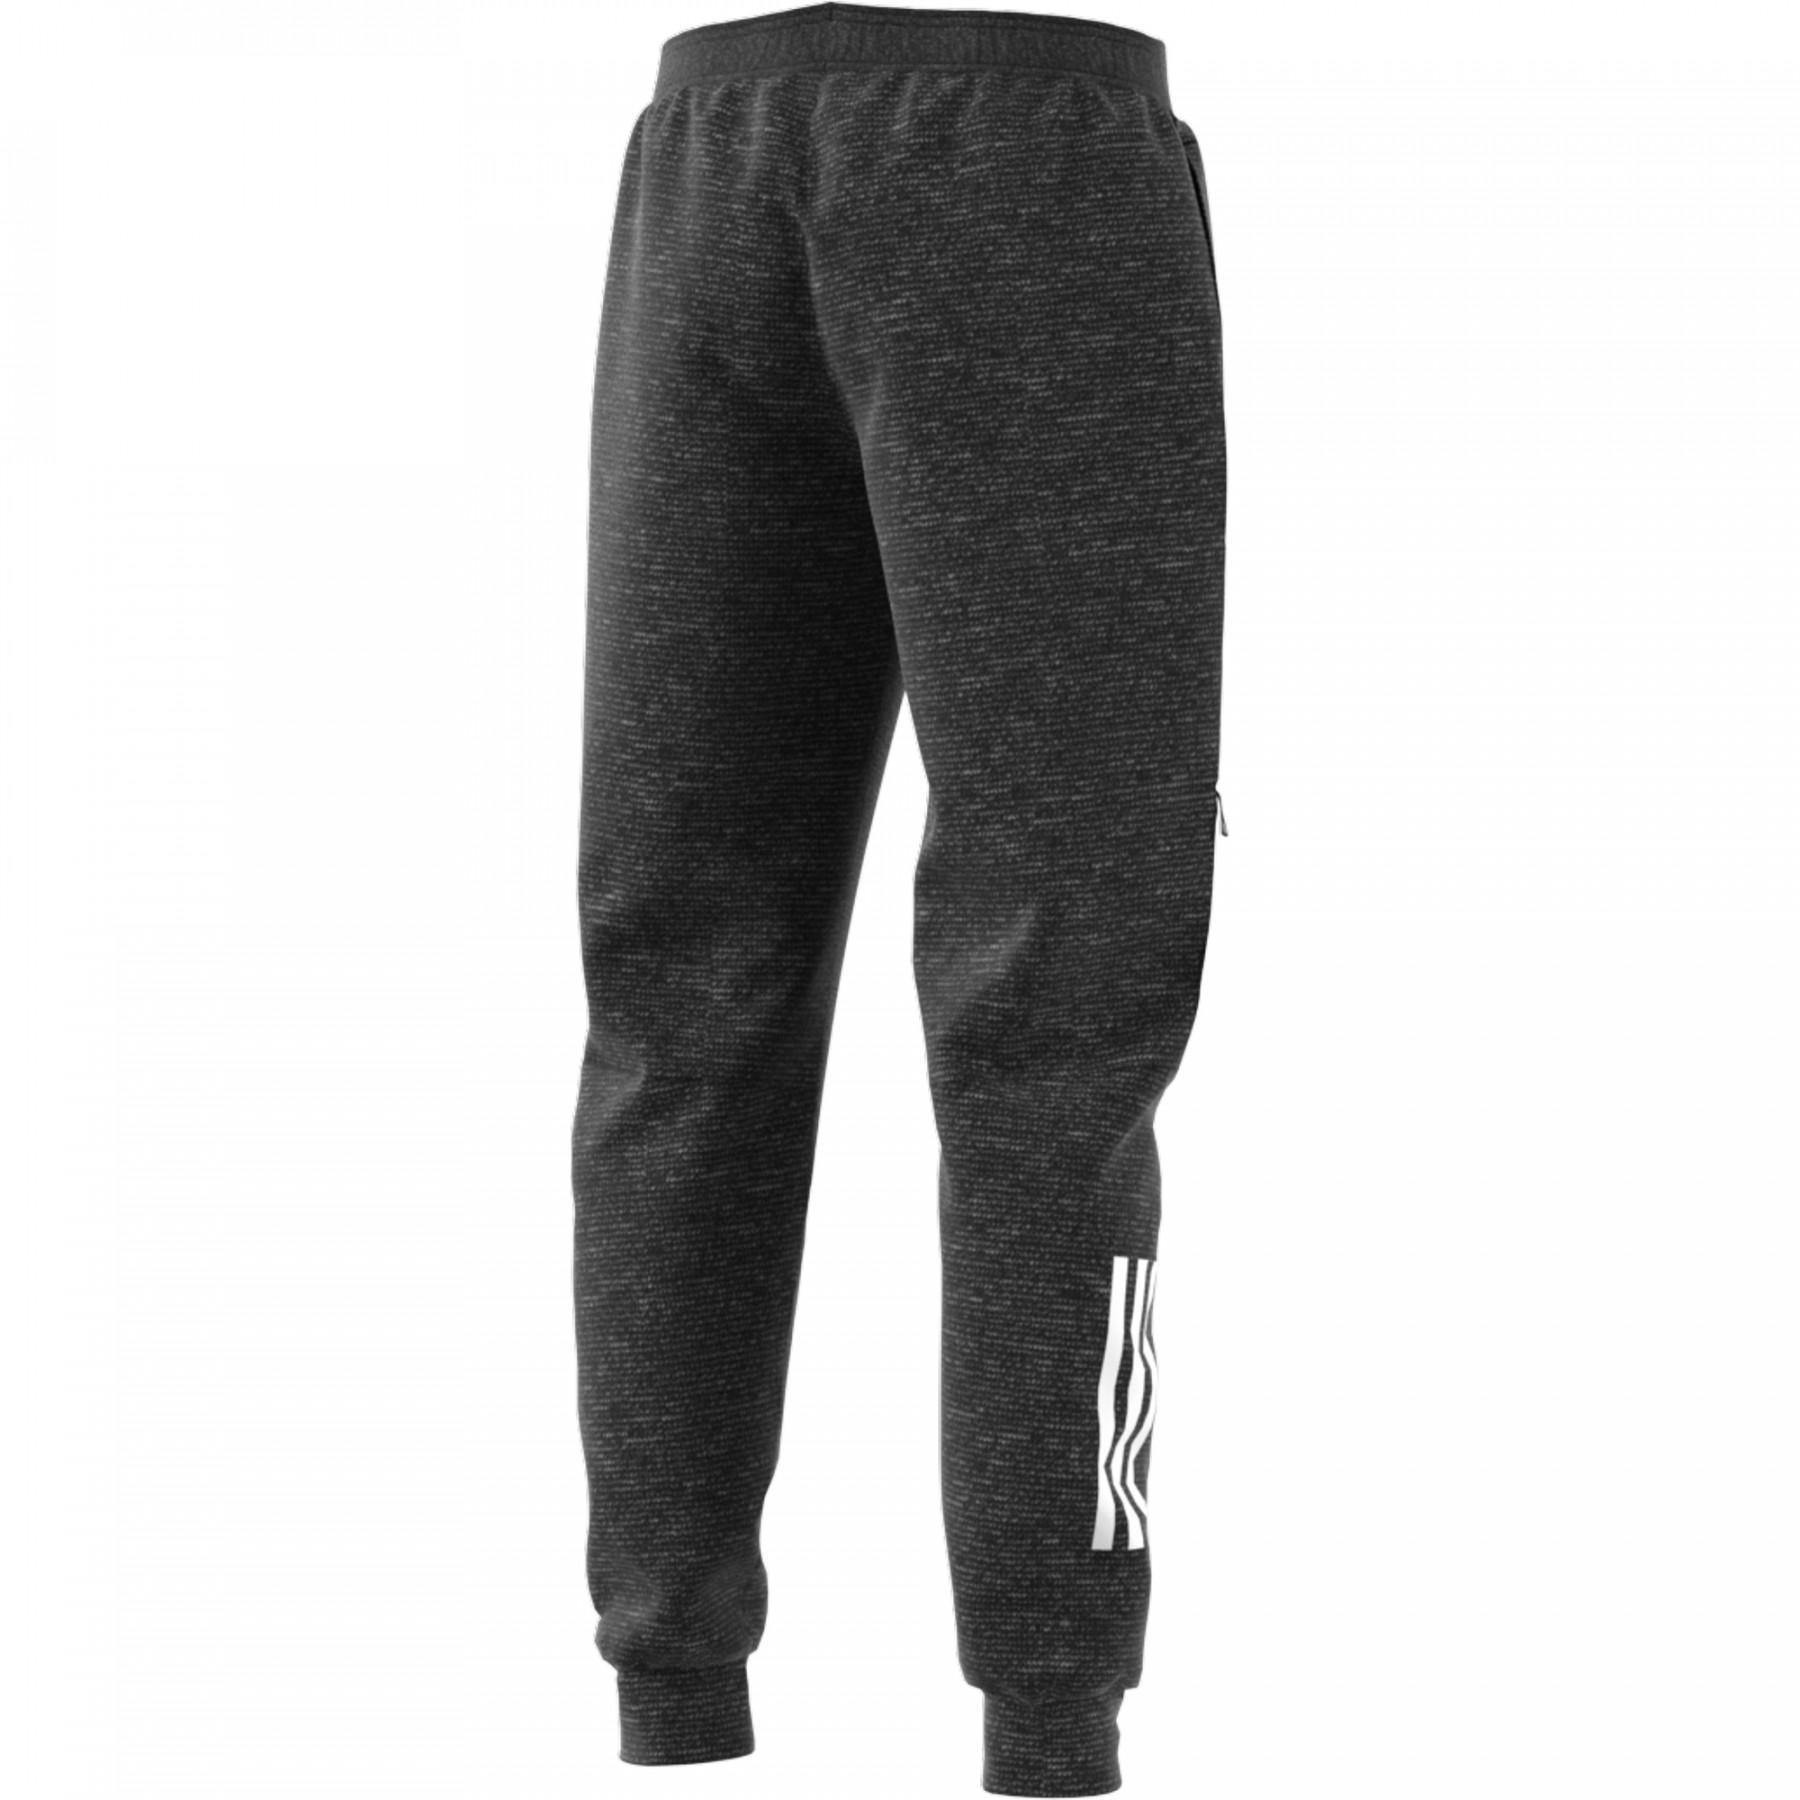 Children's trousers adidas Must Have